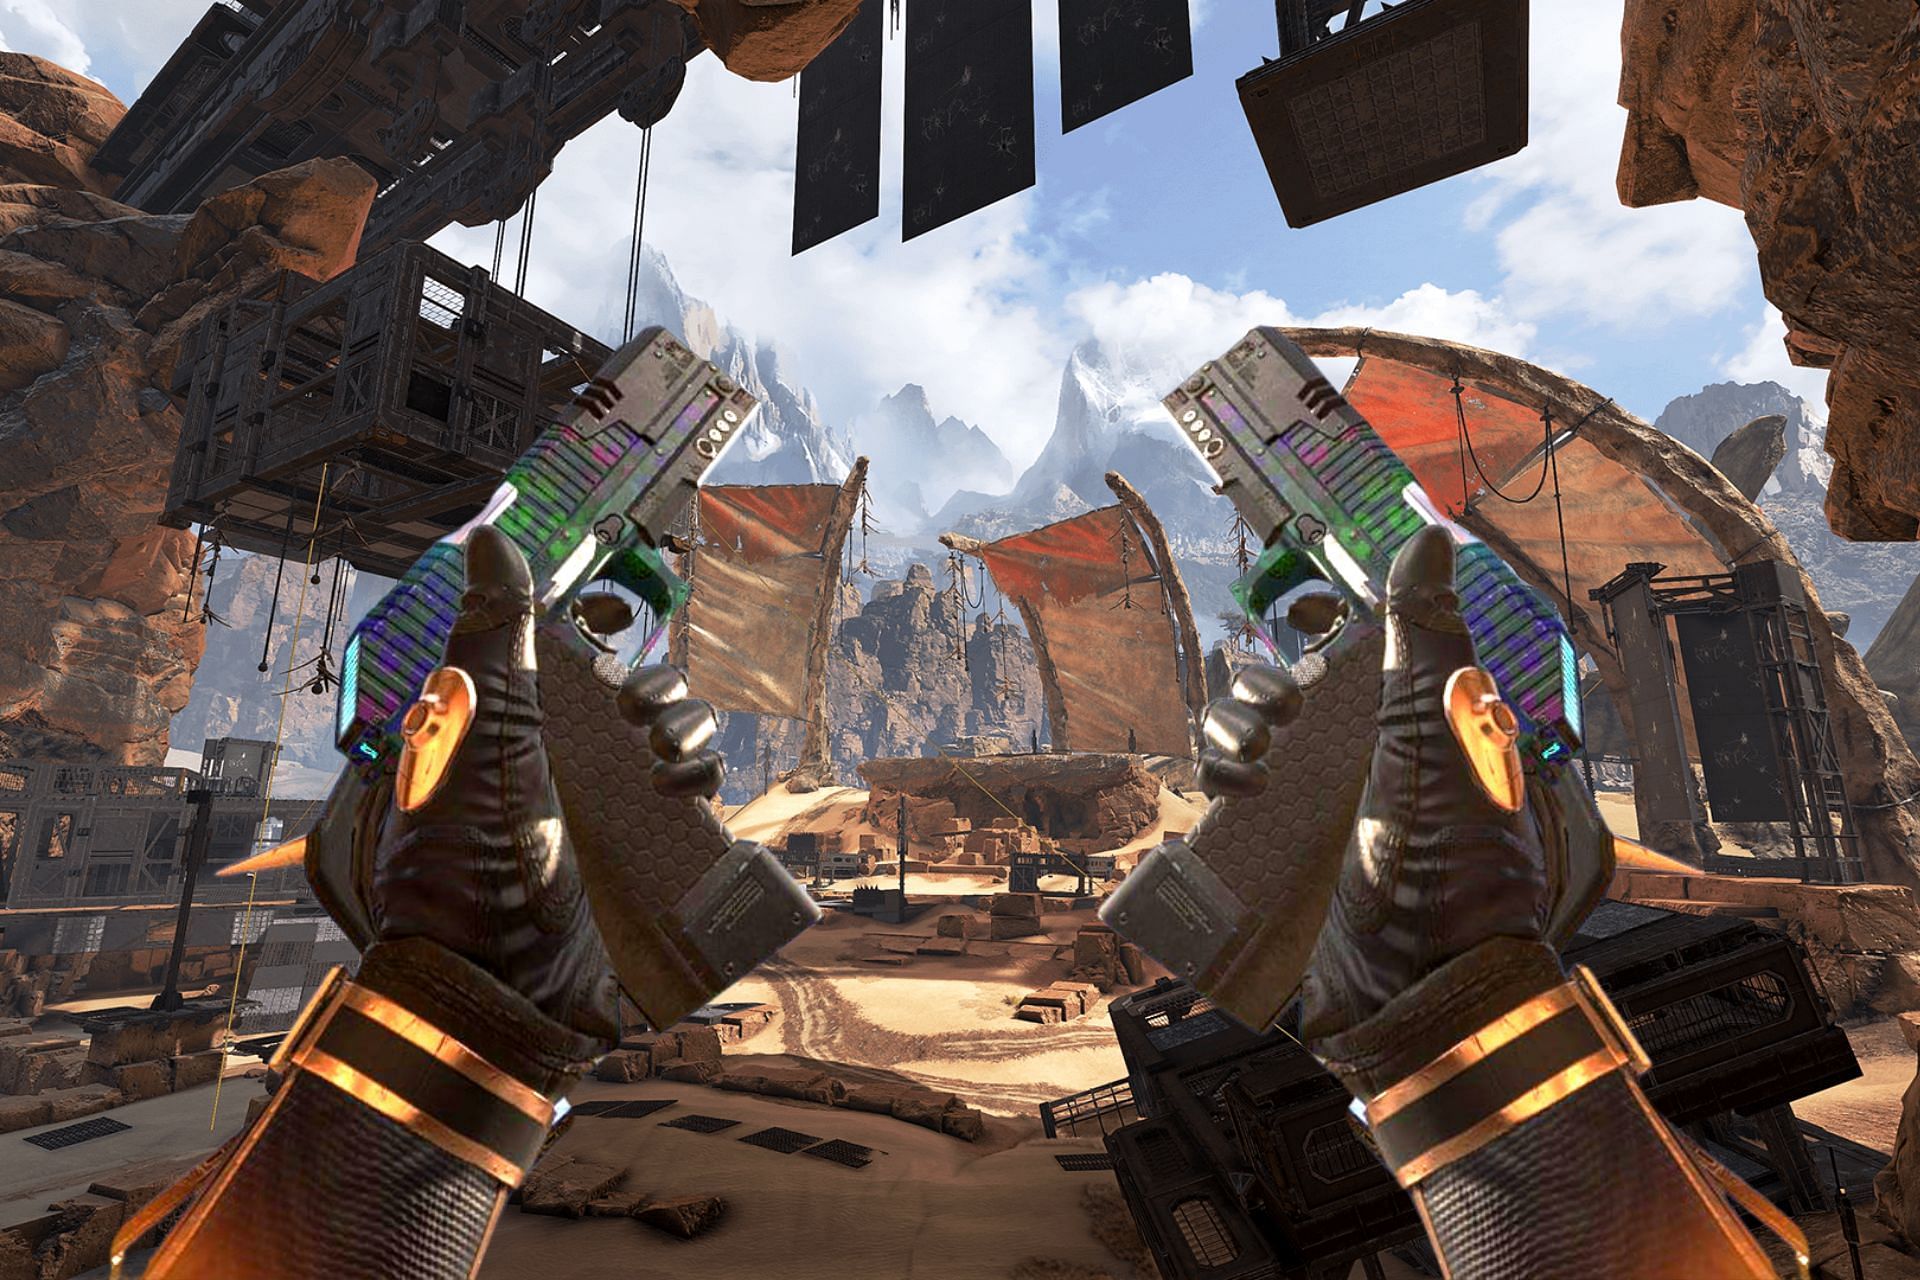 A new dual-wield weapon hack has been discovered in Apex Legends (Image via Respawn Entertainment)